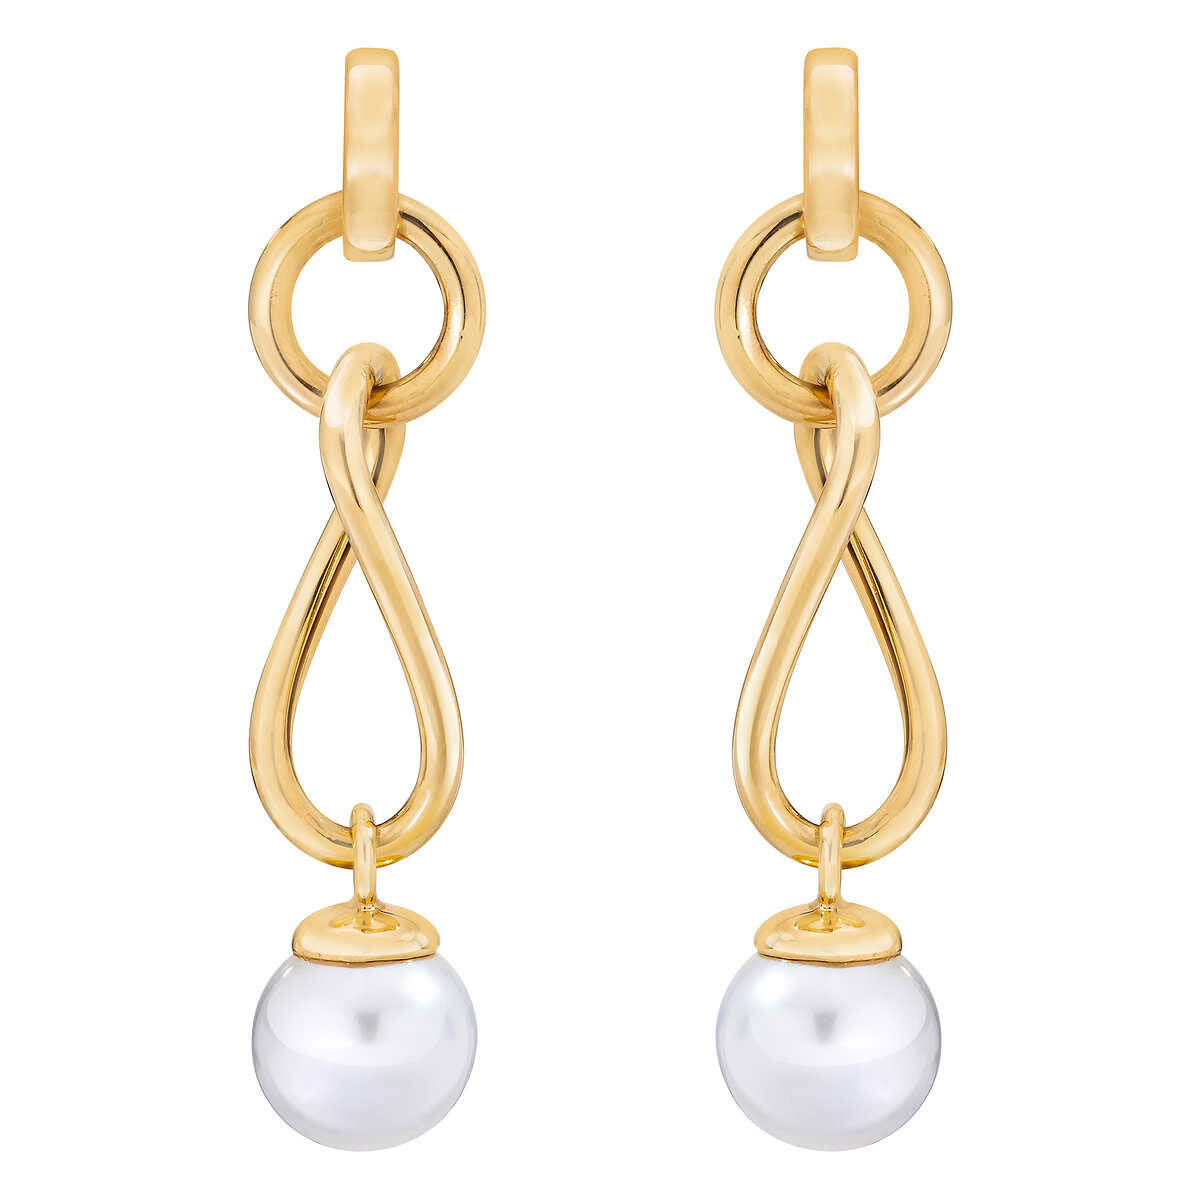 9-9.5mm Cultured Freshwater White Pearl Twist Earrings, 14ct Yellow Gold